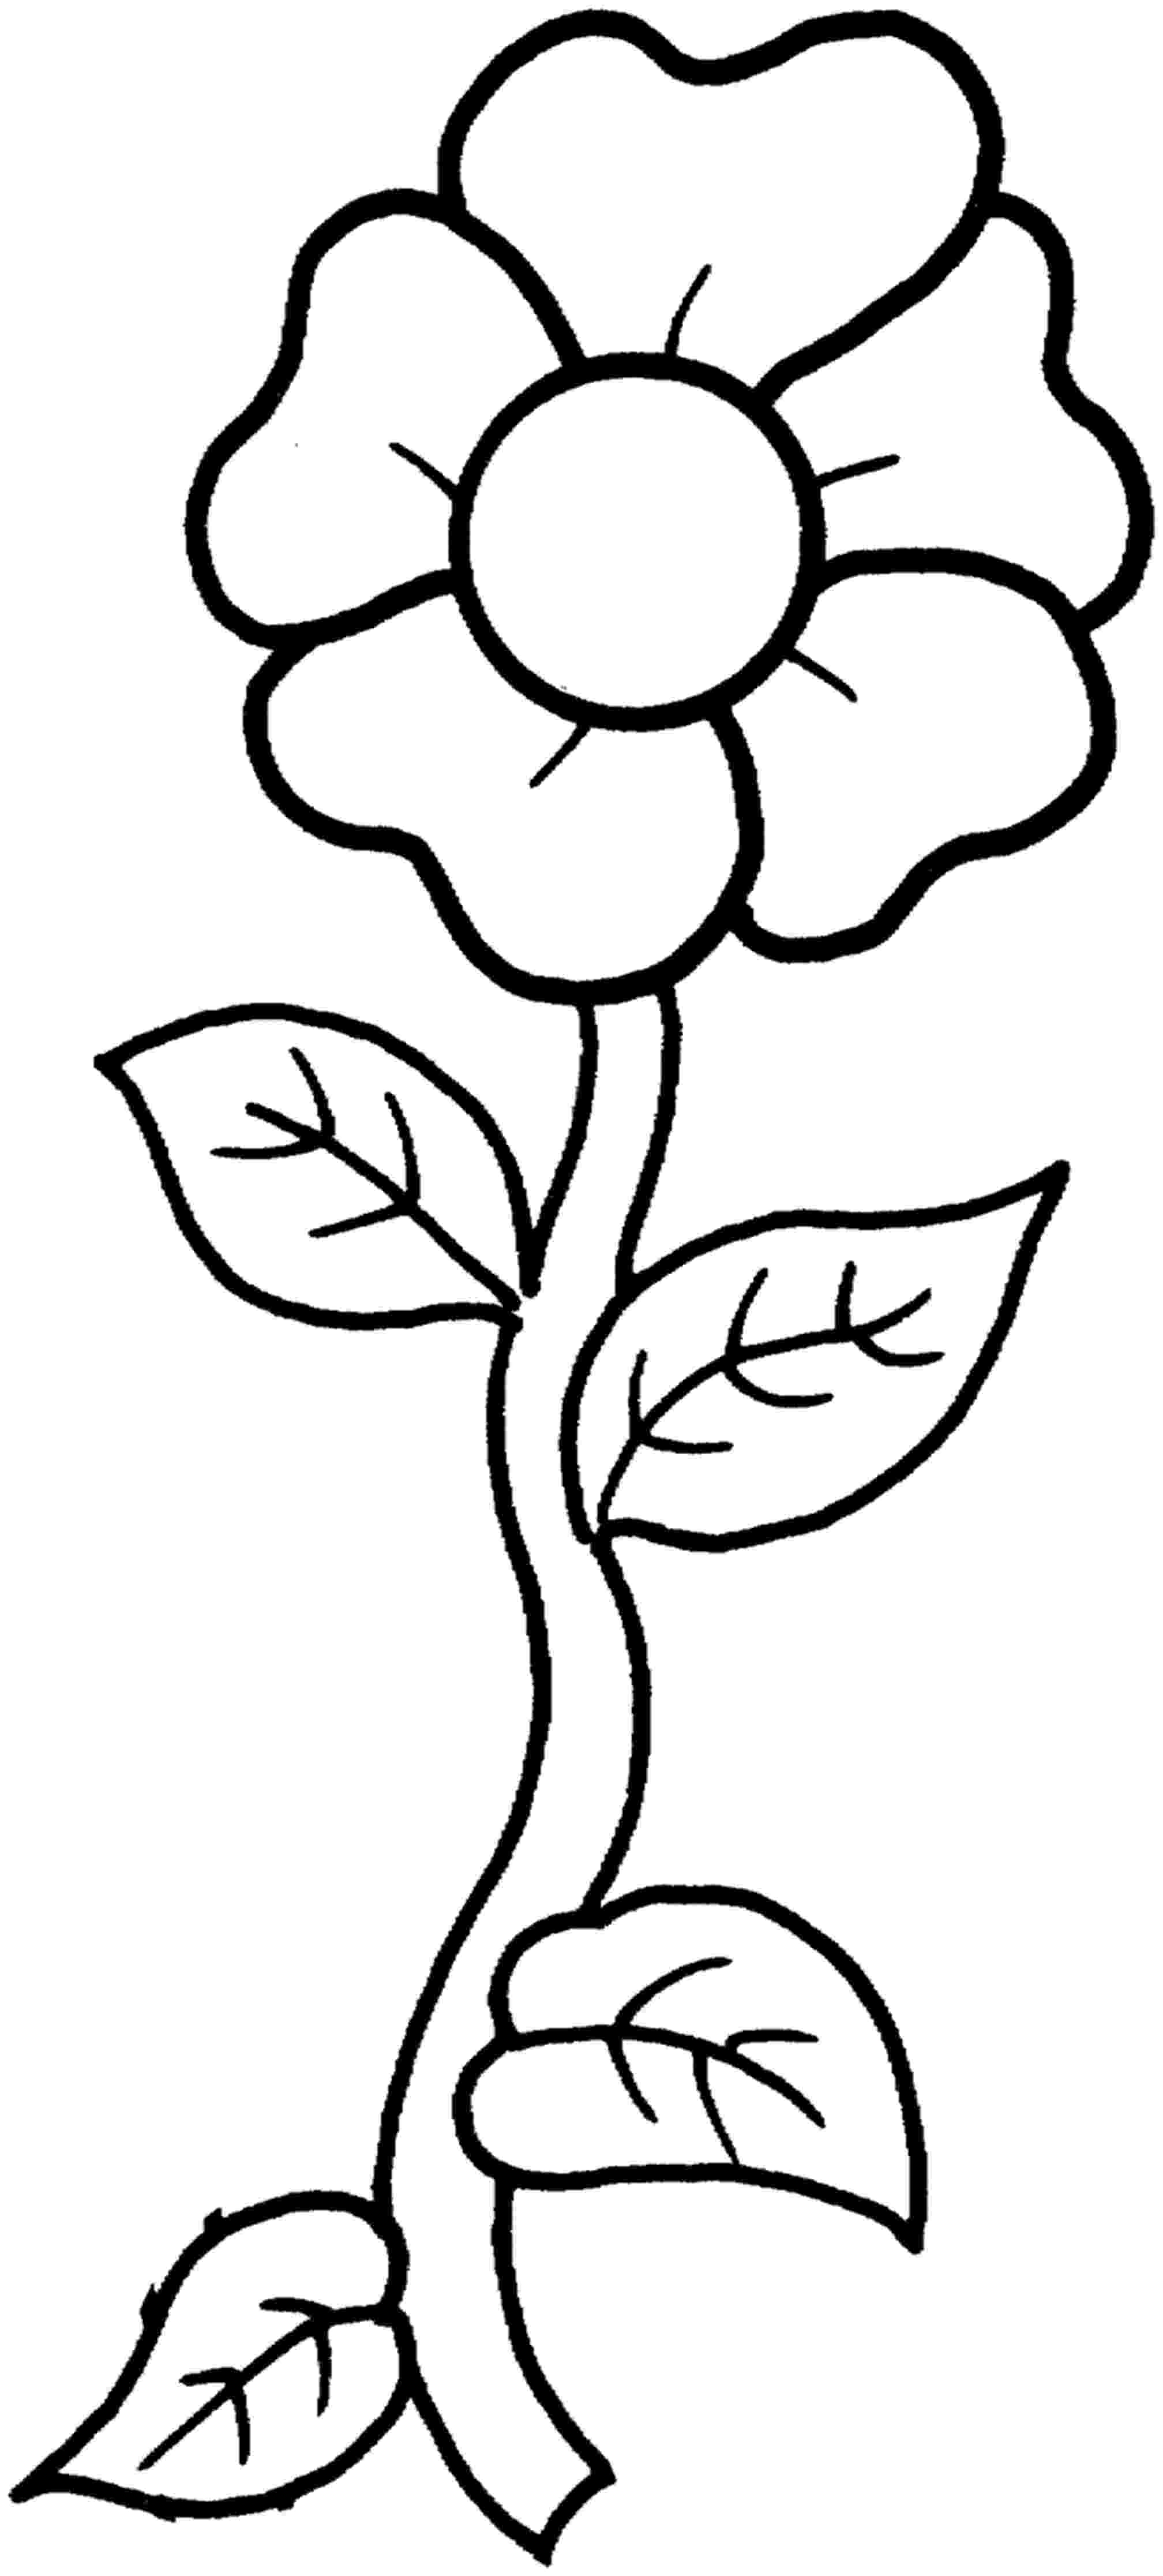 flower colouring pages flower coloring pages pages colouring flower 1 1